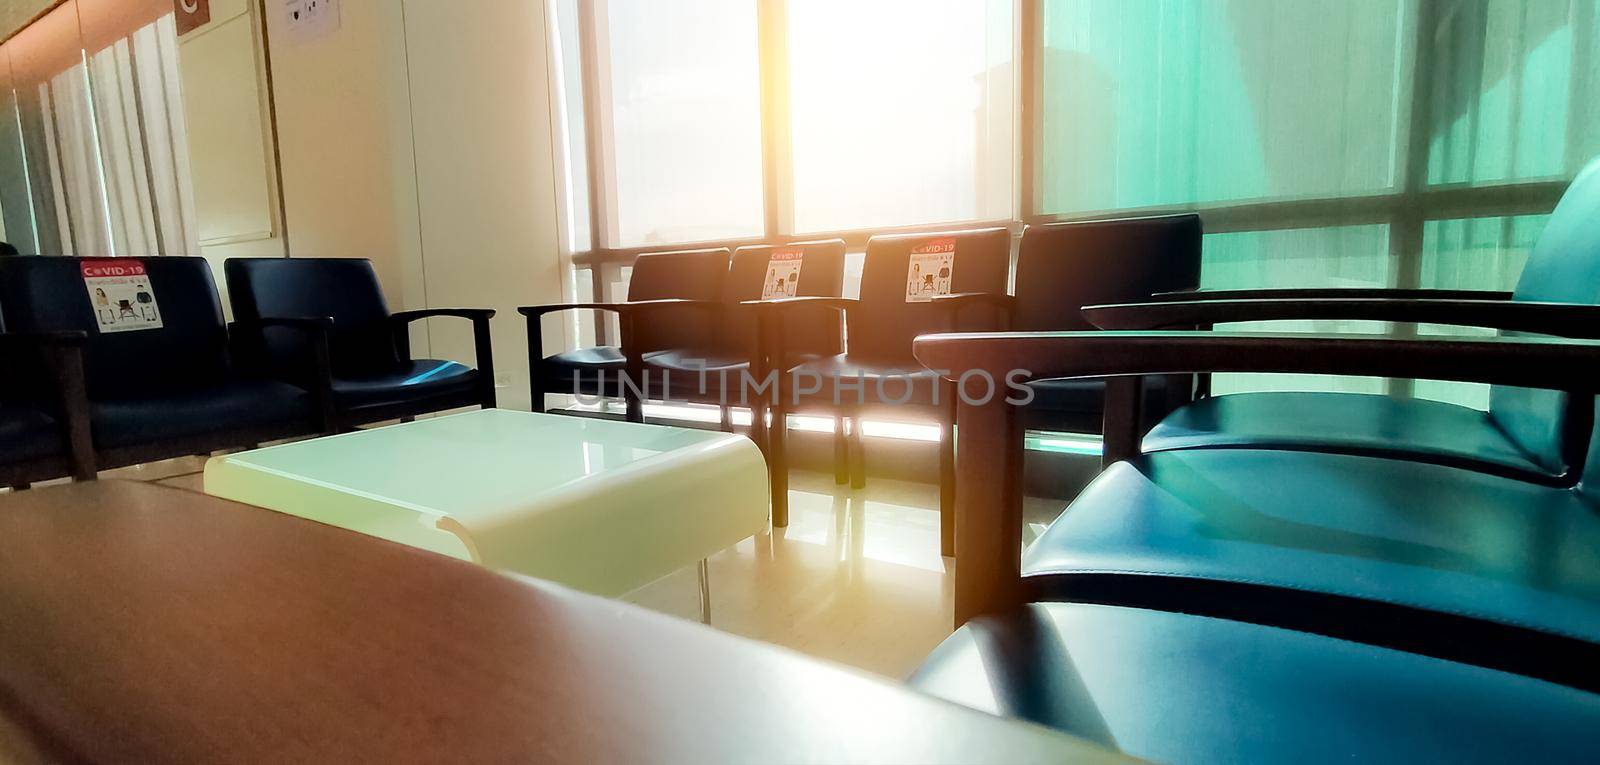 Social distancing. Empty dark blue chair with gap for social distance to prevent coronavirus (COVID-19) at waiting room in office for waiting queue. Public chair for social distancing in new normal. by Fahroni